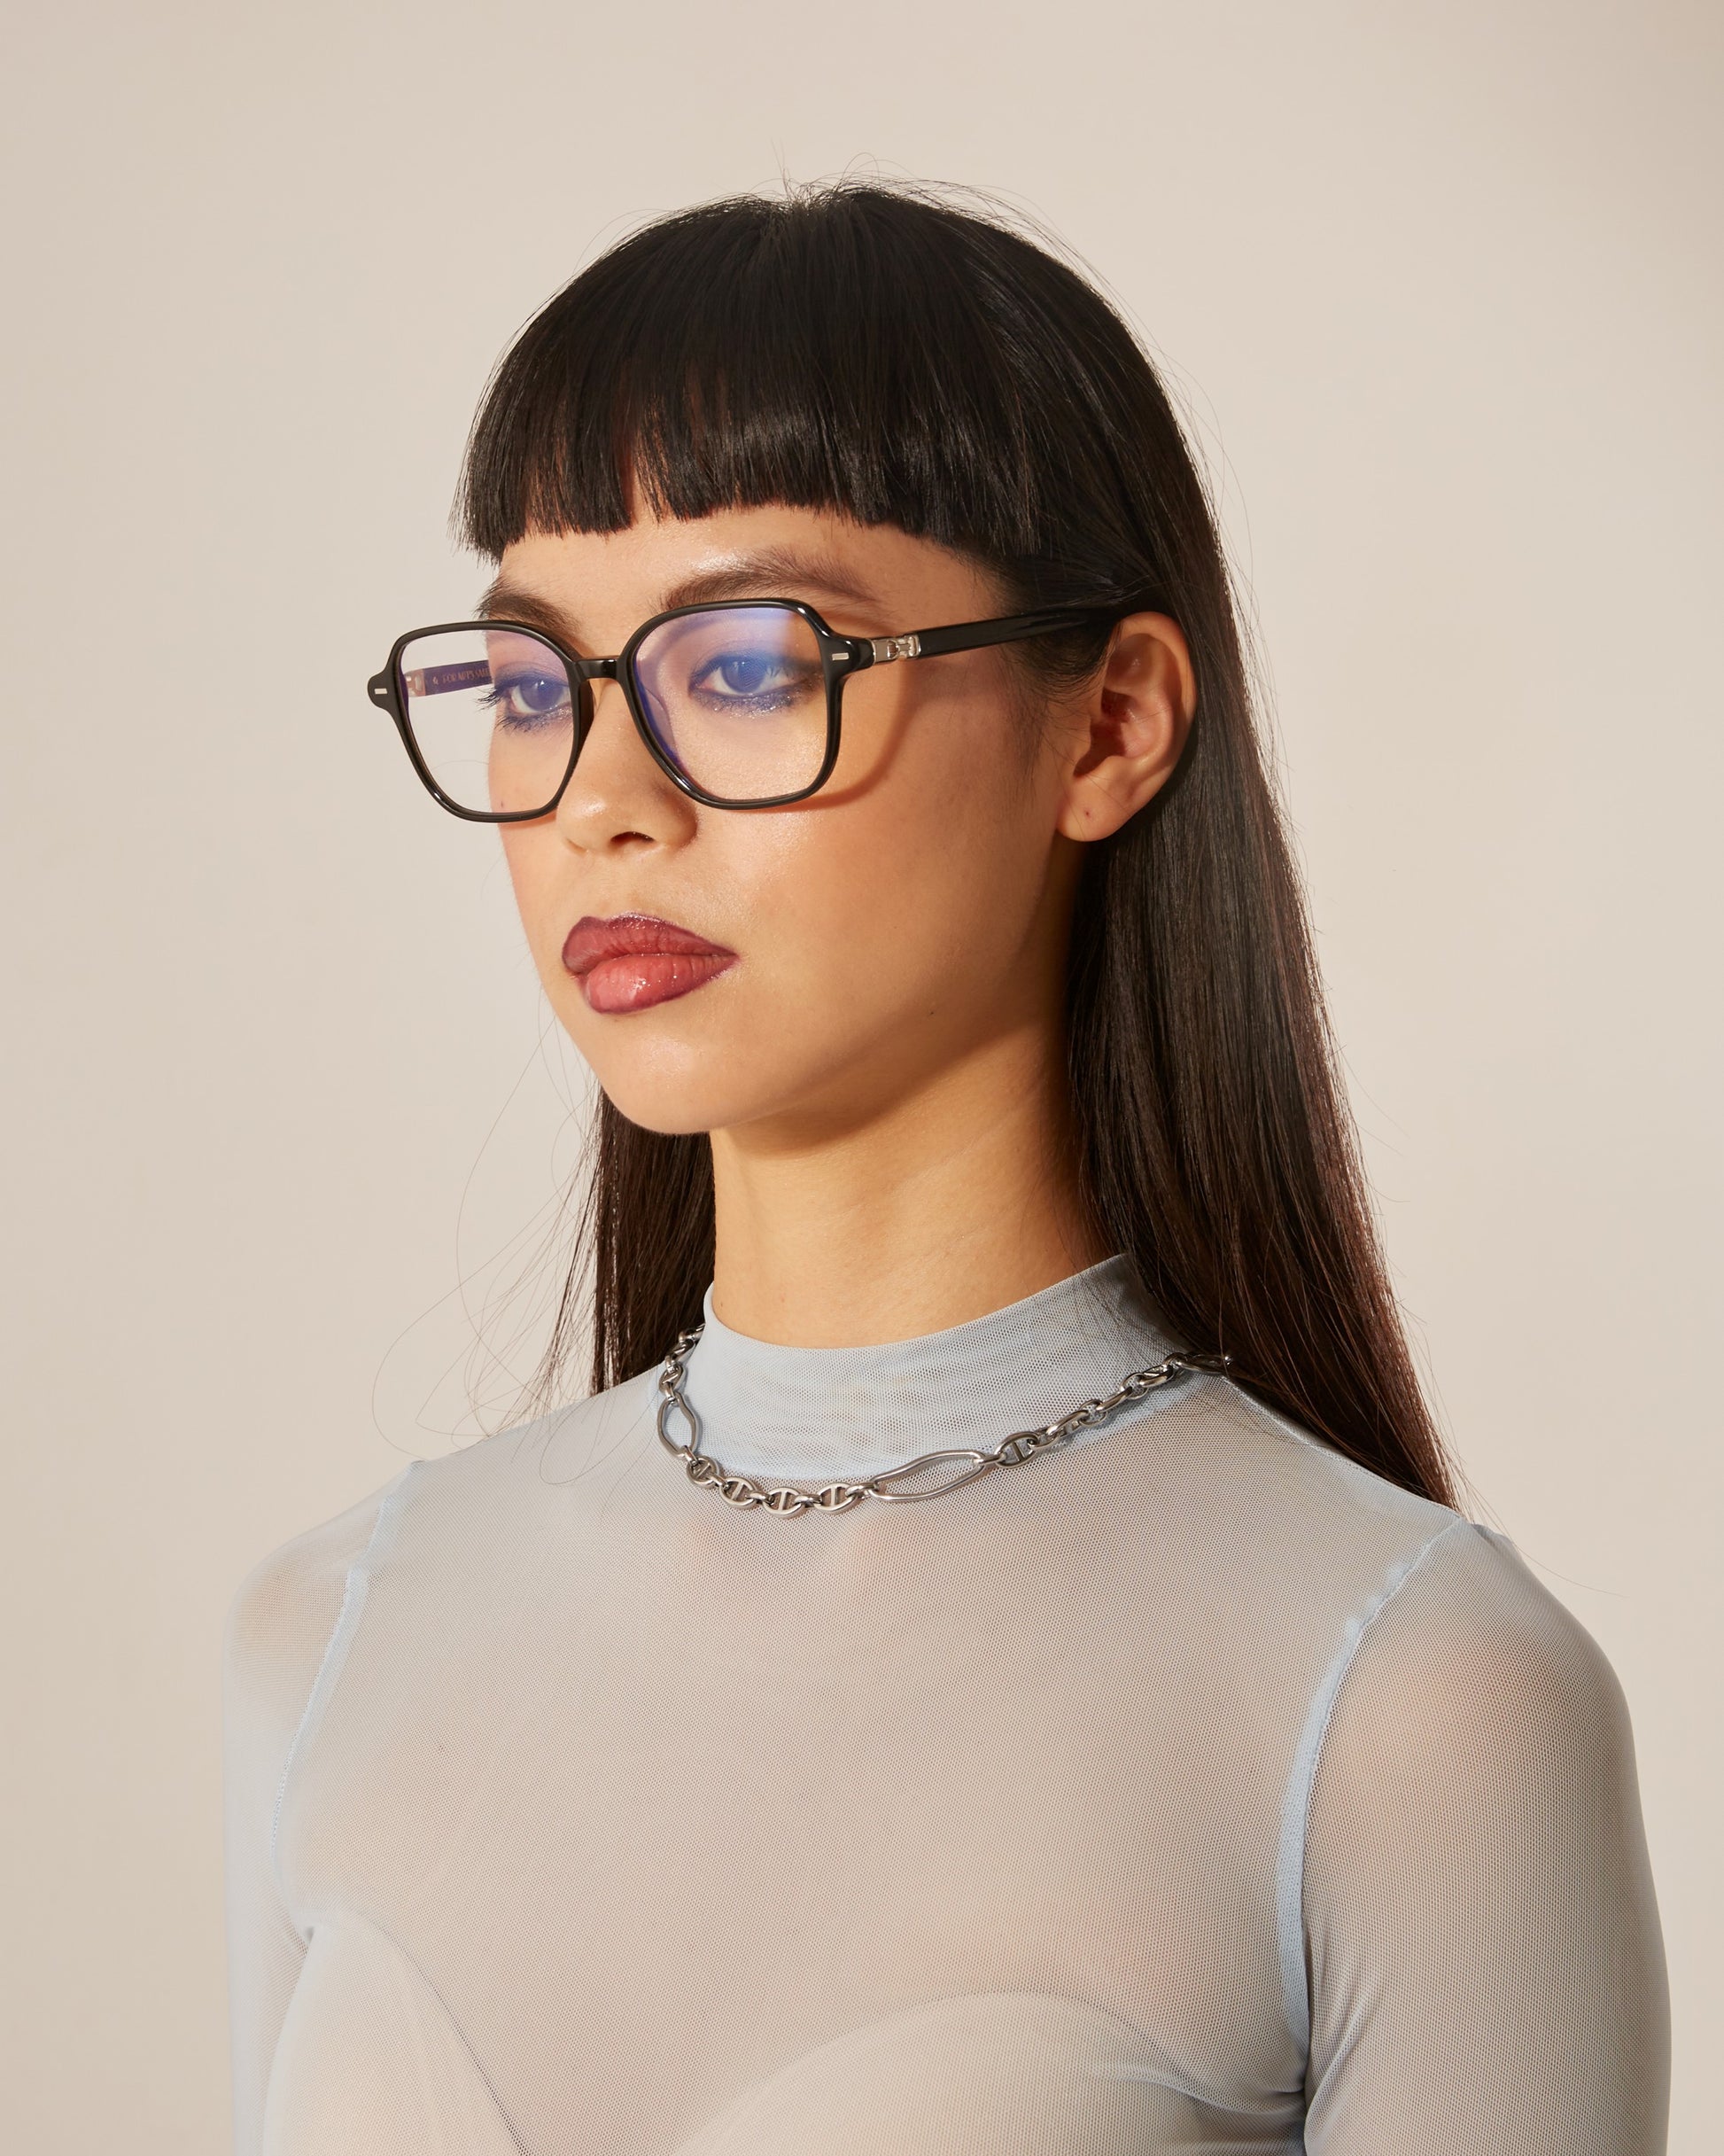 A woman with straight black hair and black cat-eye framed optical glasses, wearing a sheer, ribbed top and a chain necklace.